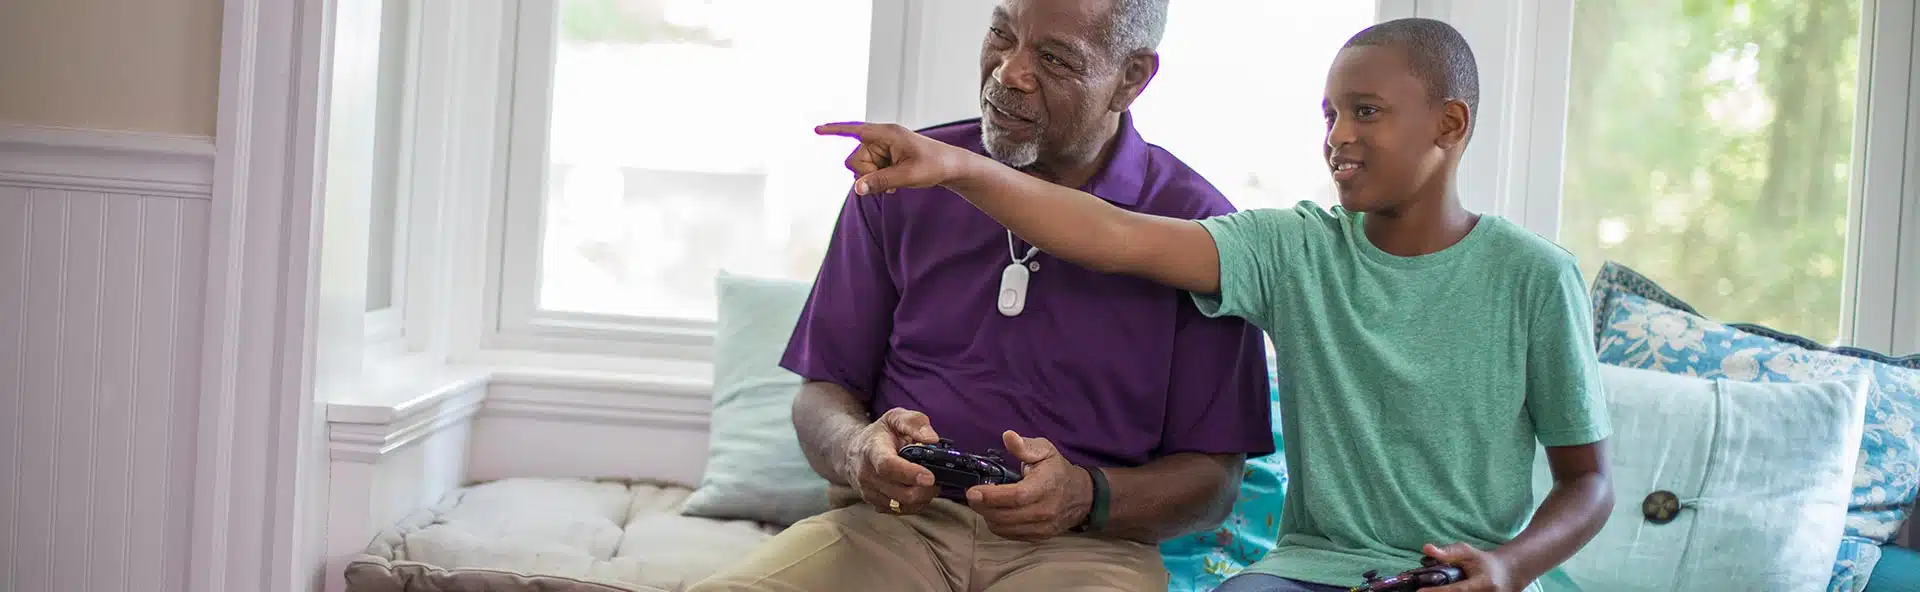 Senior playing video game with his grandchild